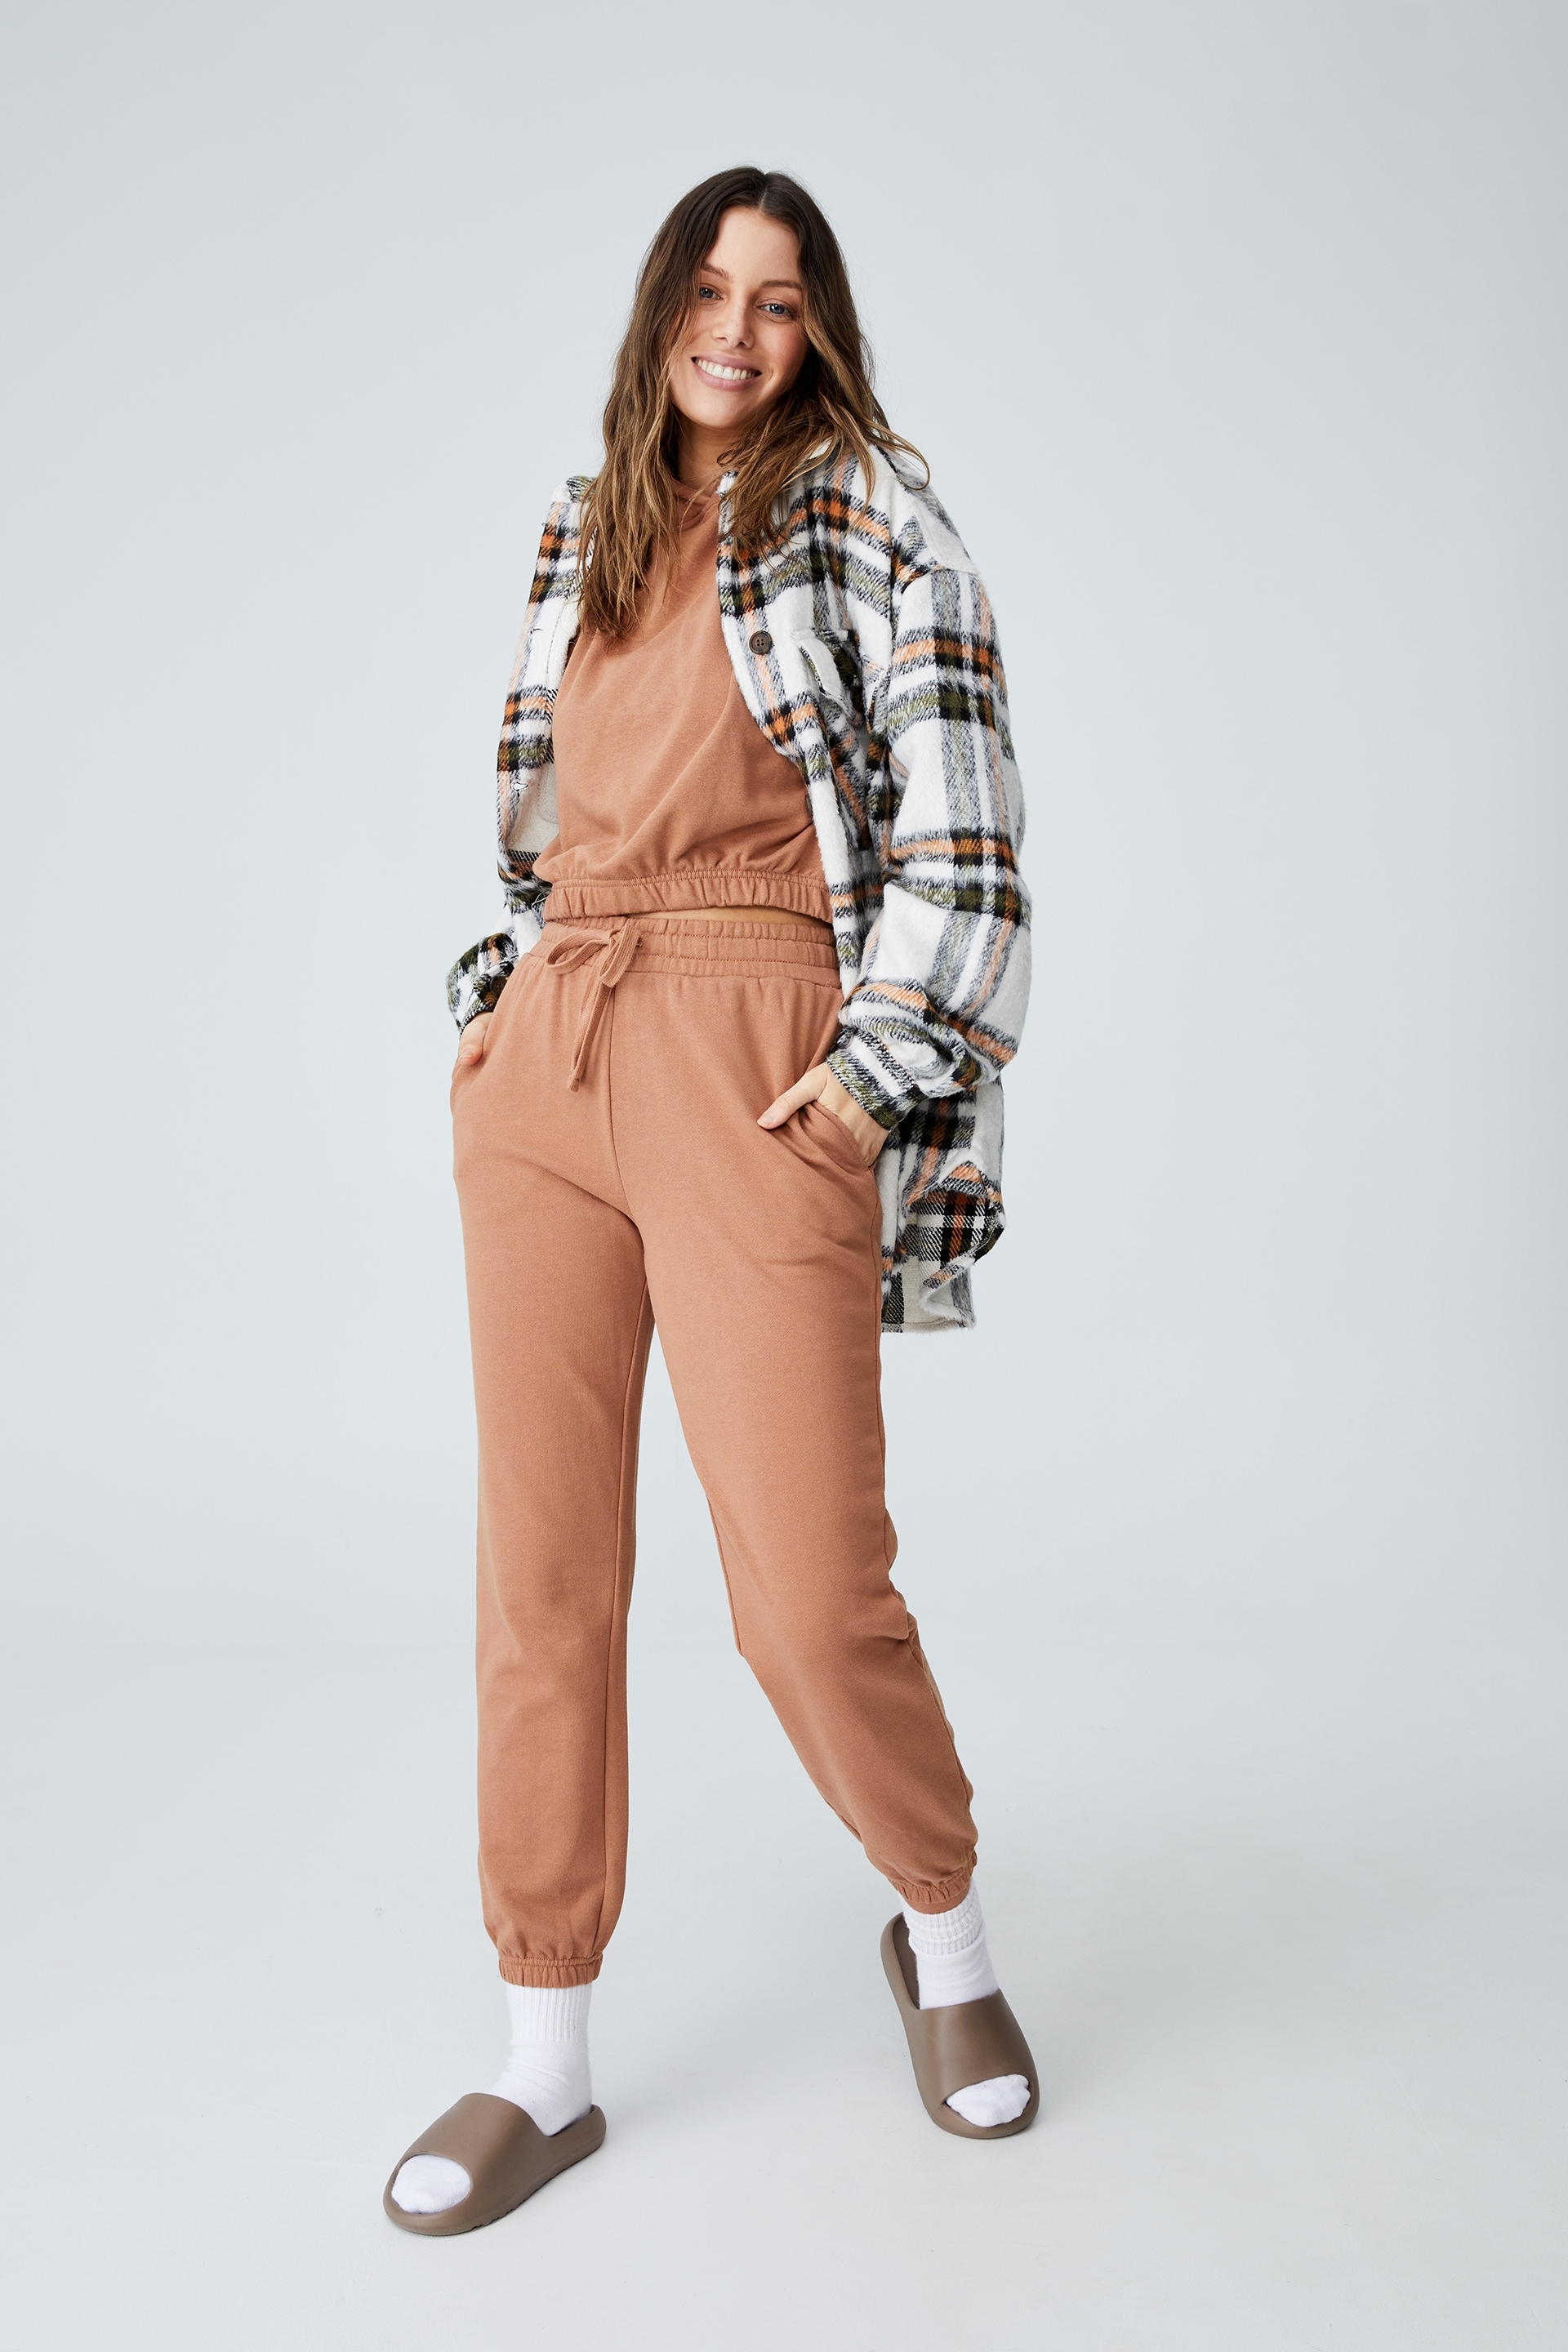 Cotton On Women - Freestyle Trackpant - Soft camel